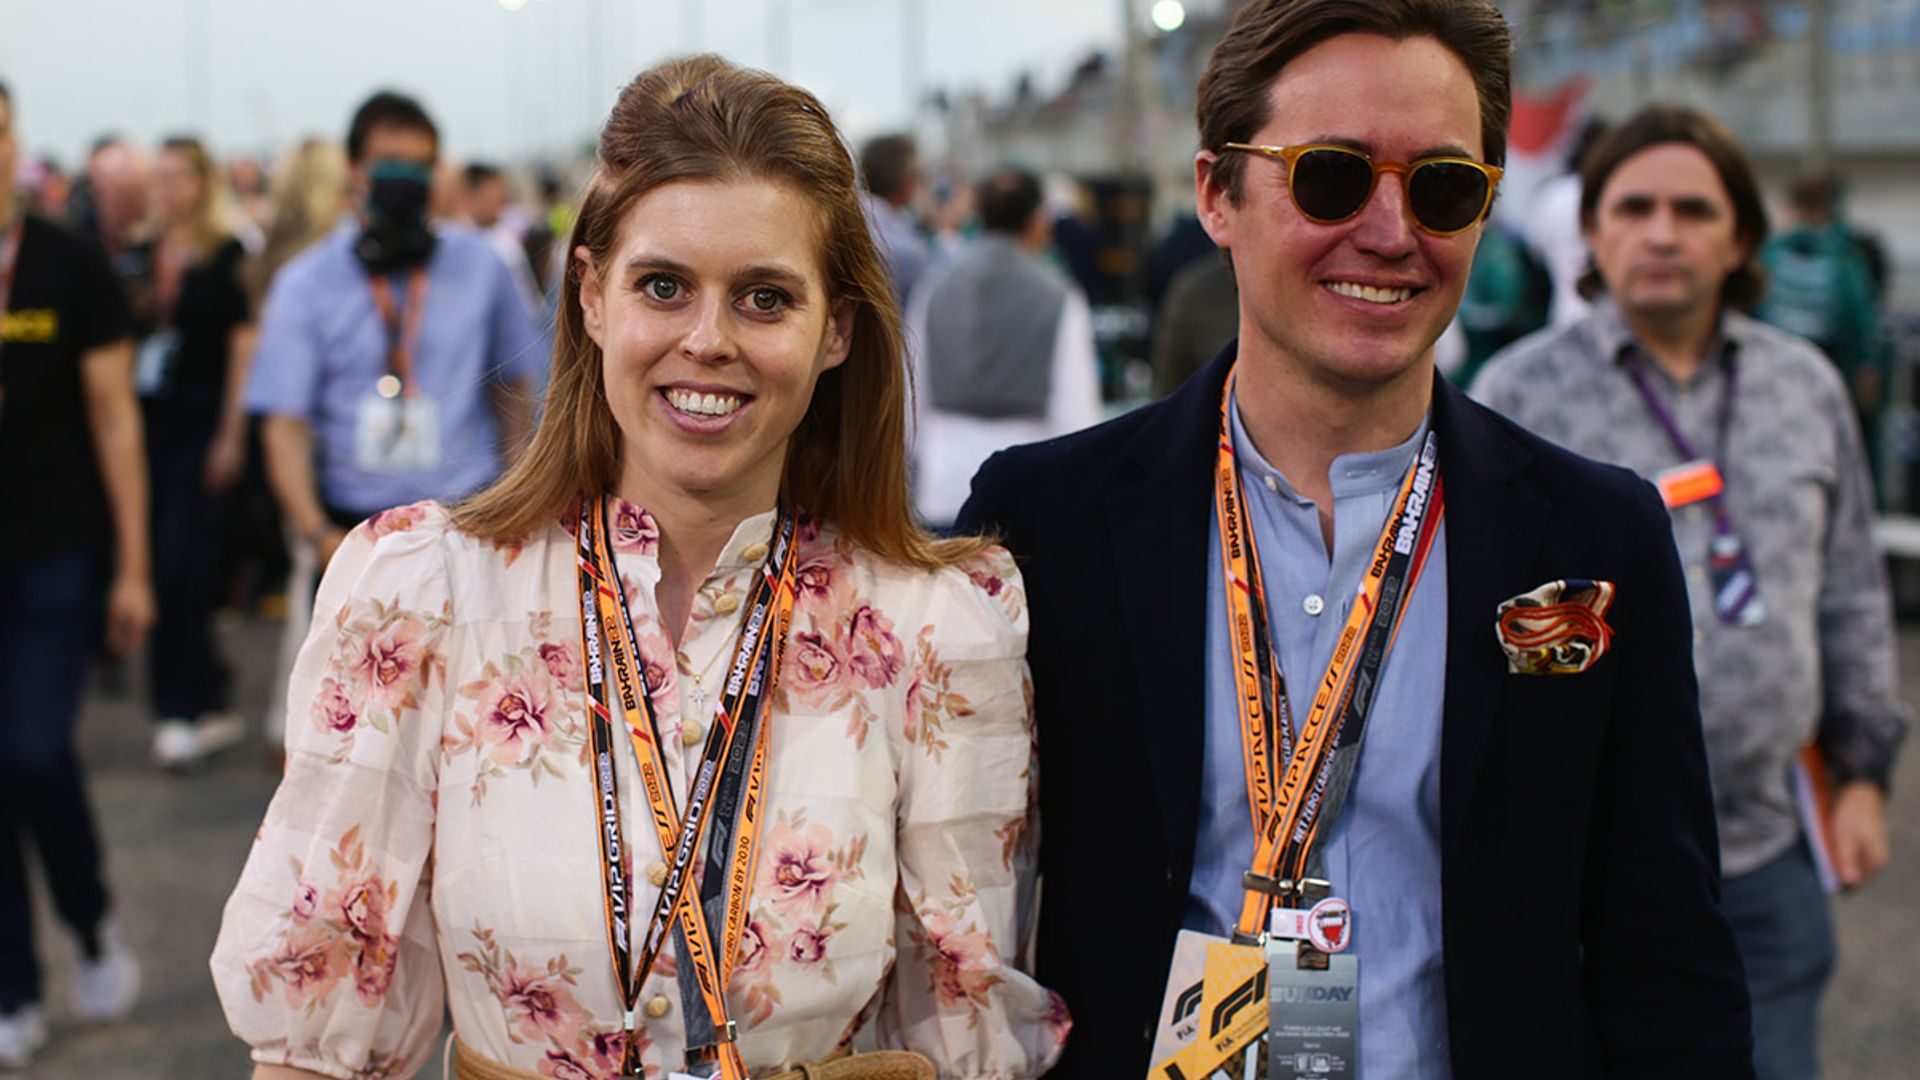 Here's why Princess Beatrice's husband Edoardo Mapelli Mozzi is in Paris without her